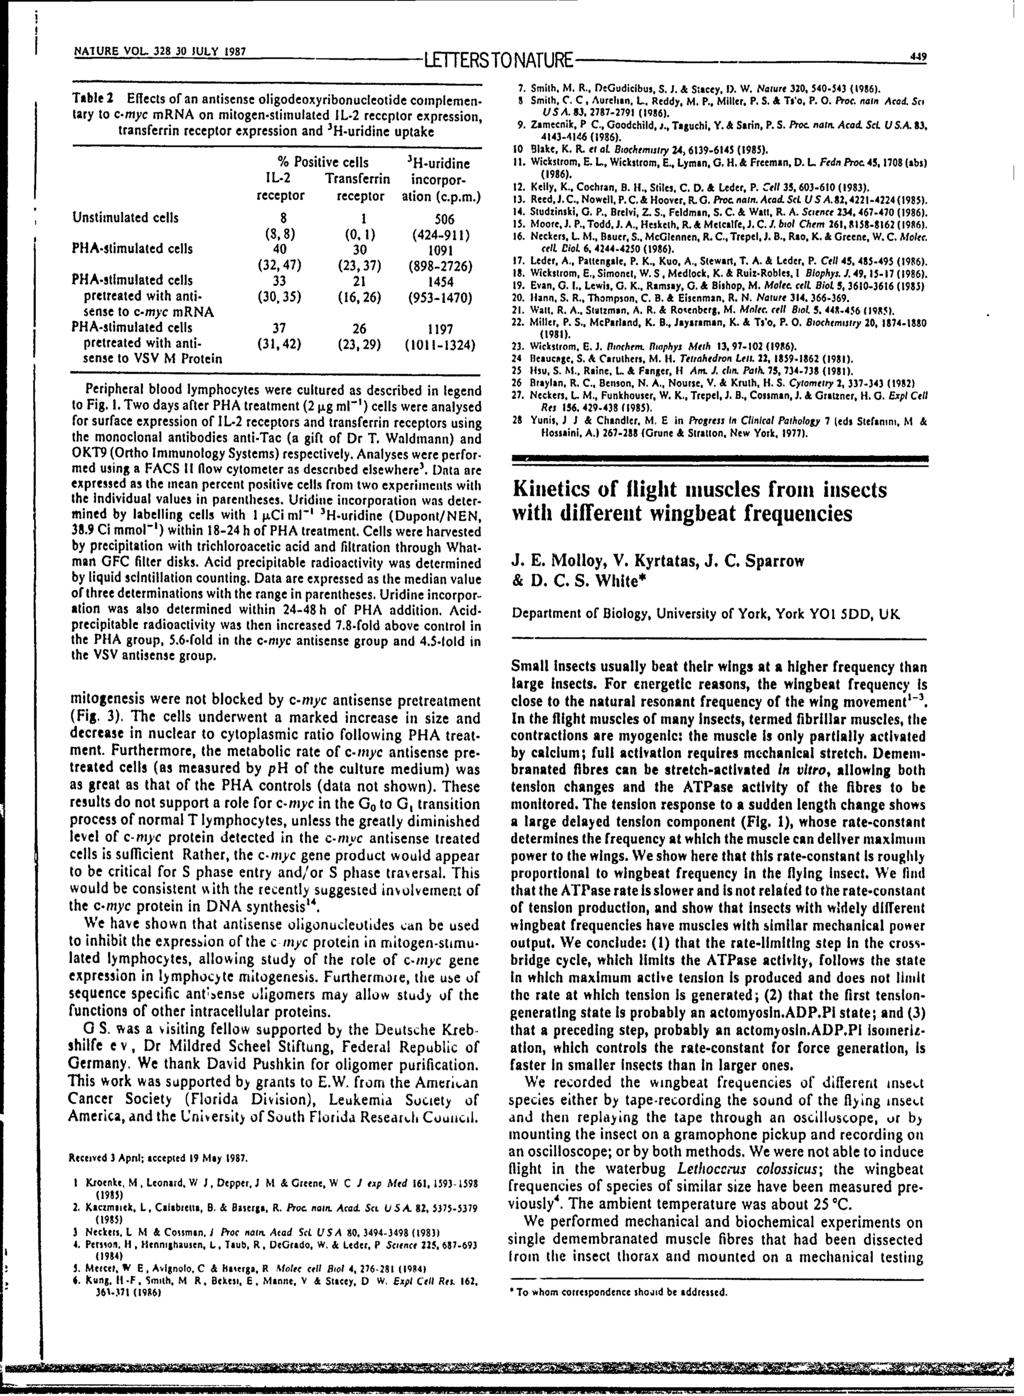 NAIURE-VOL-328 30 JULY 1987 LETTERS TO NATURE49 7. Smith. M.. R., DeGudiclbos, S. J. & Stacey. 1). W. Nature 320, 540-543 (1986).